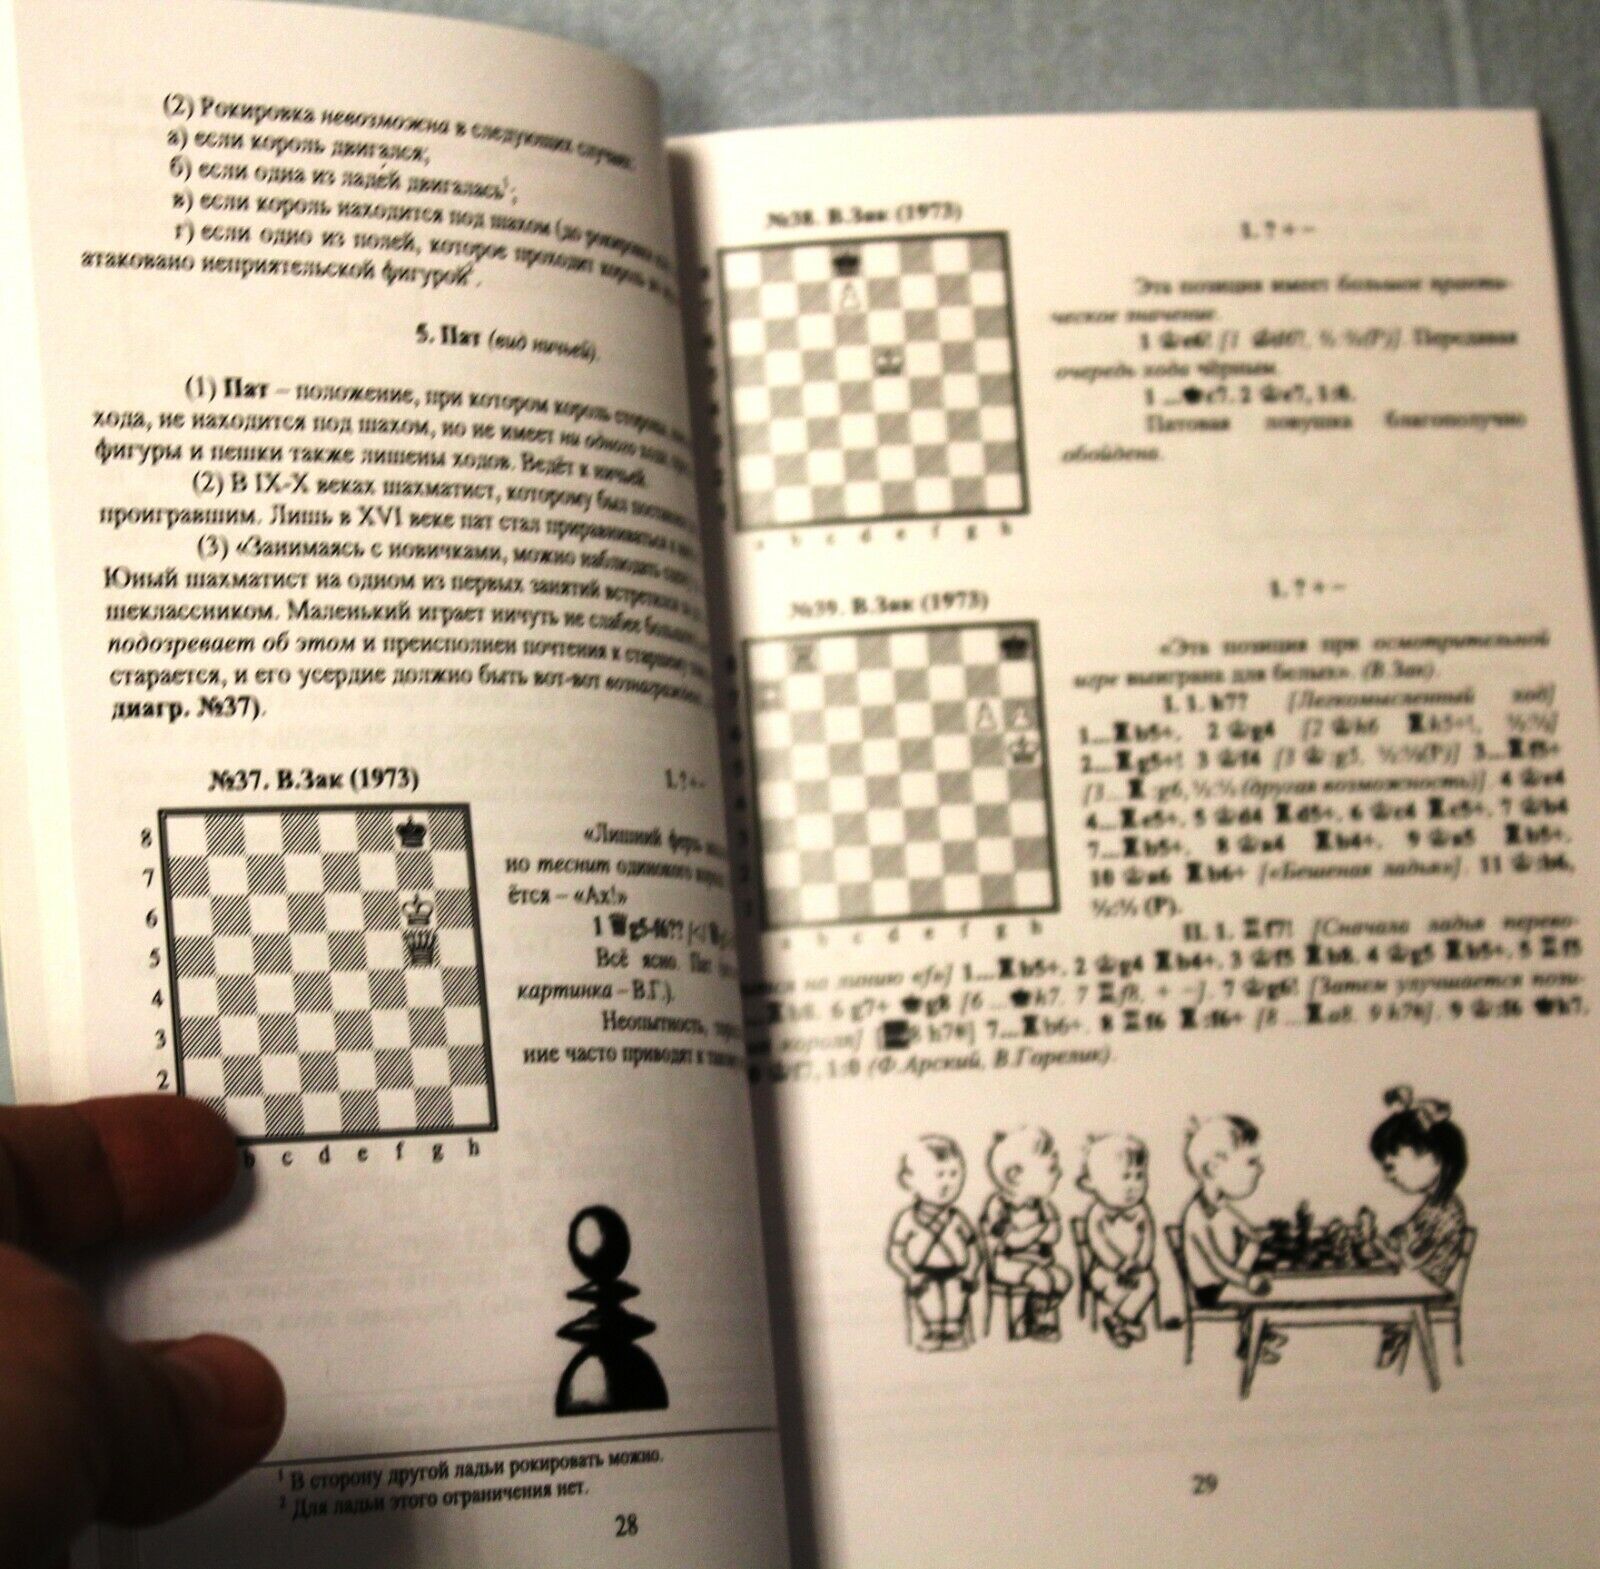 11491.Russian Chess Book. Steps of the chess game. Gorelik. New York, 2010